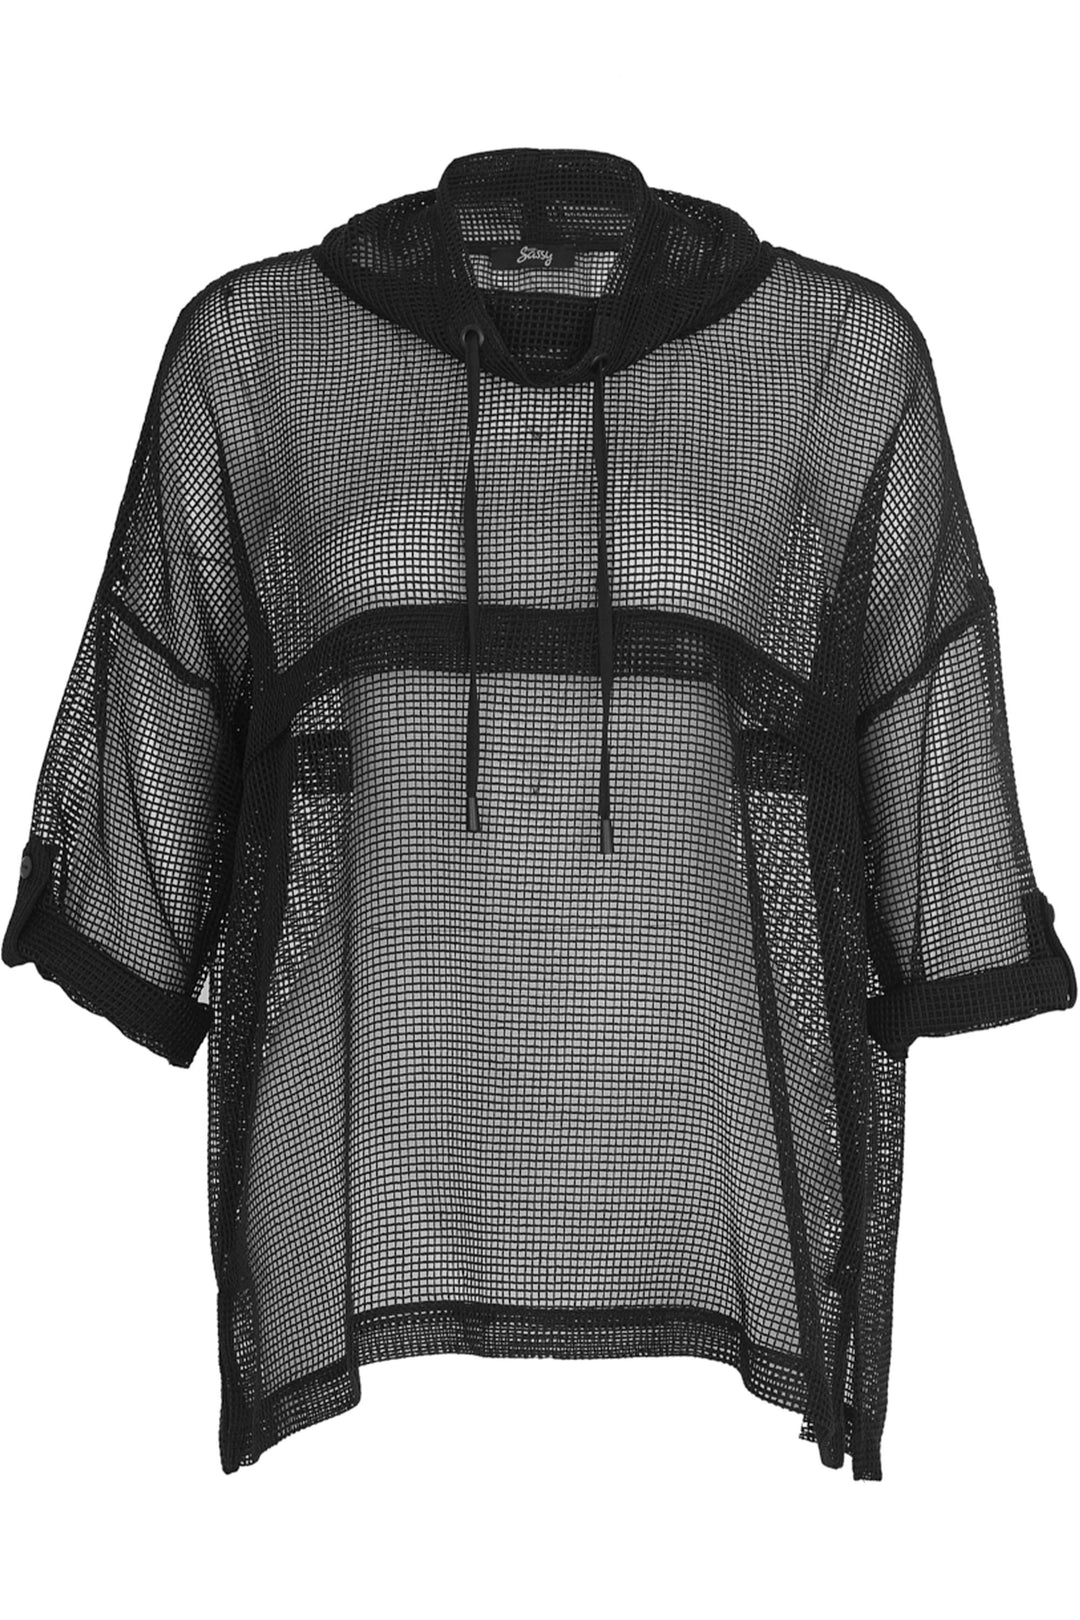 Ever Sassy Spring 2024  Made with a transparent mesh fabric, this hoody-style top adds a touch of edge to any outfit. The relaxed fit and side slits provide ultimate comfort while keeping you on-trend. 